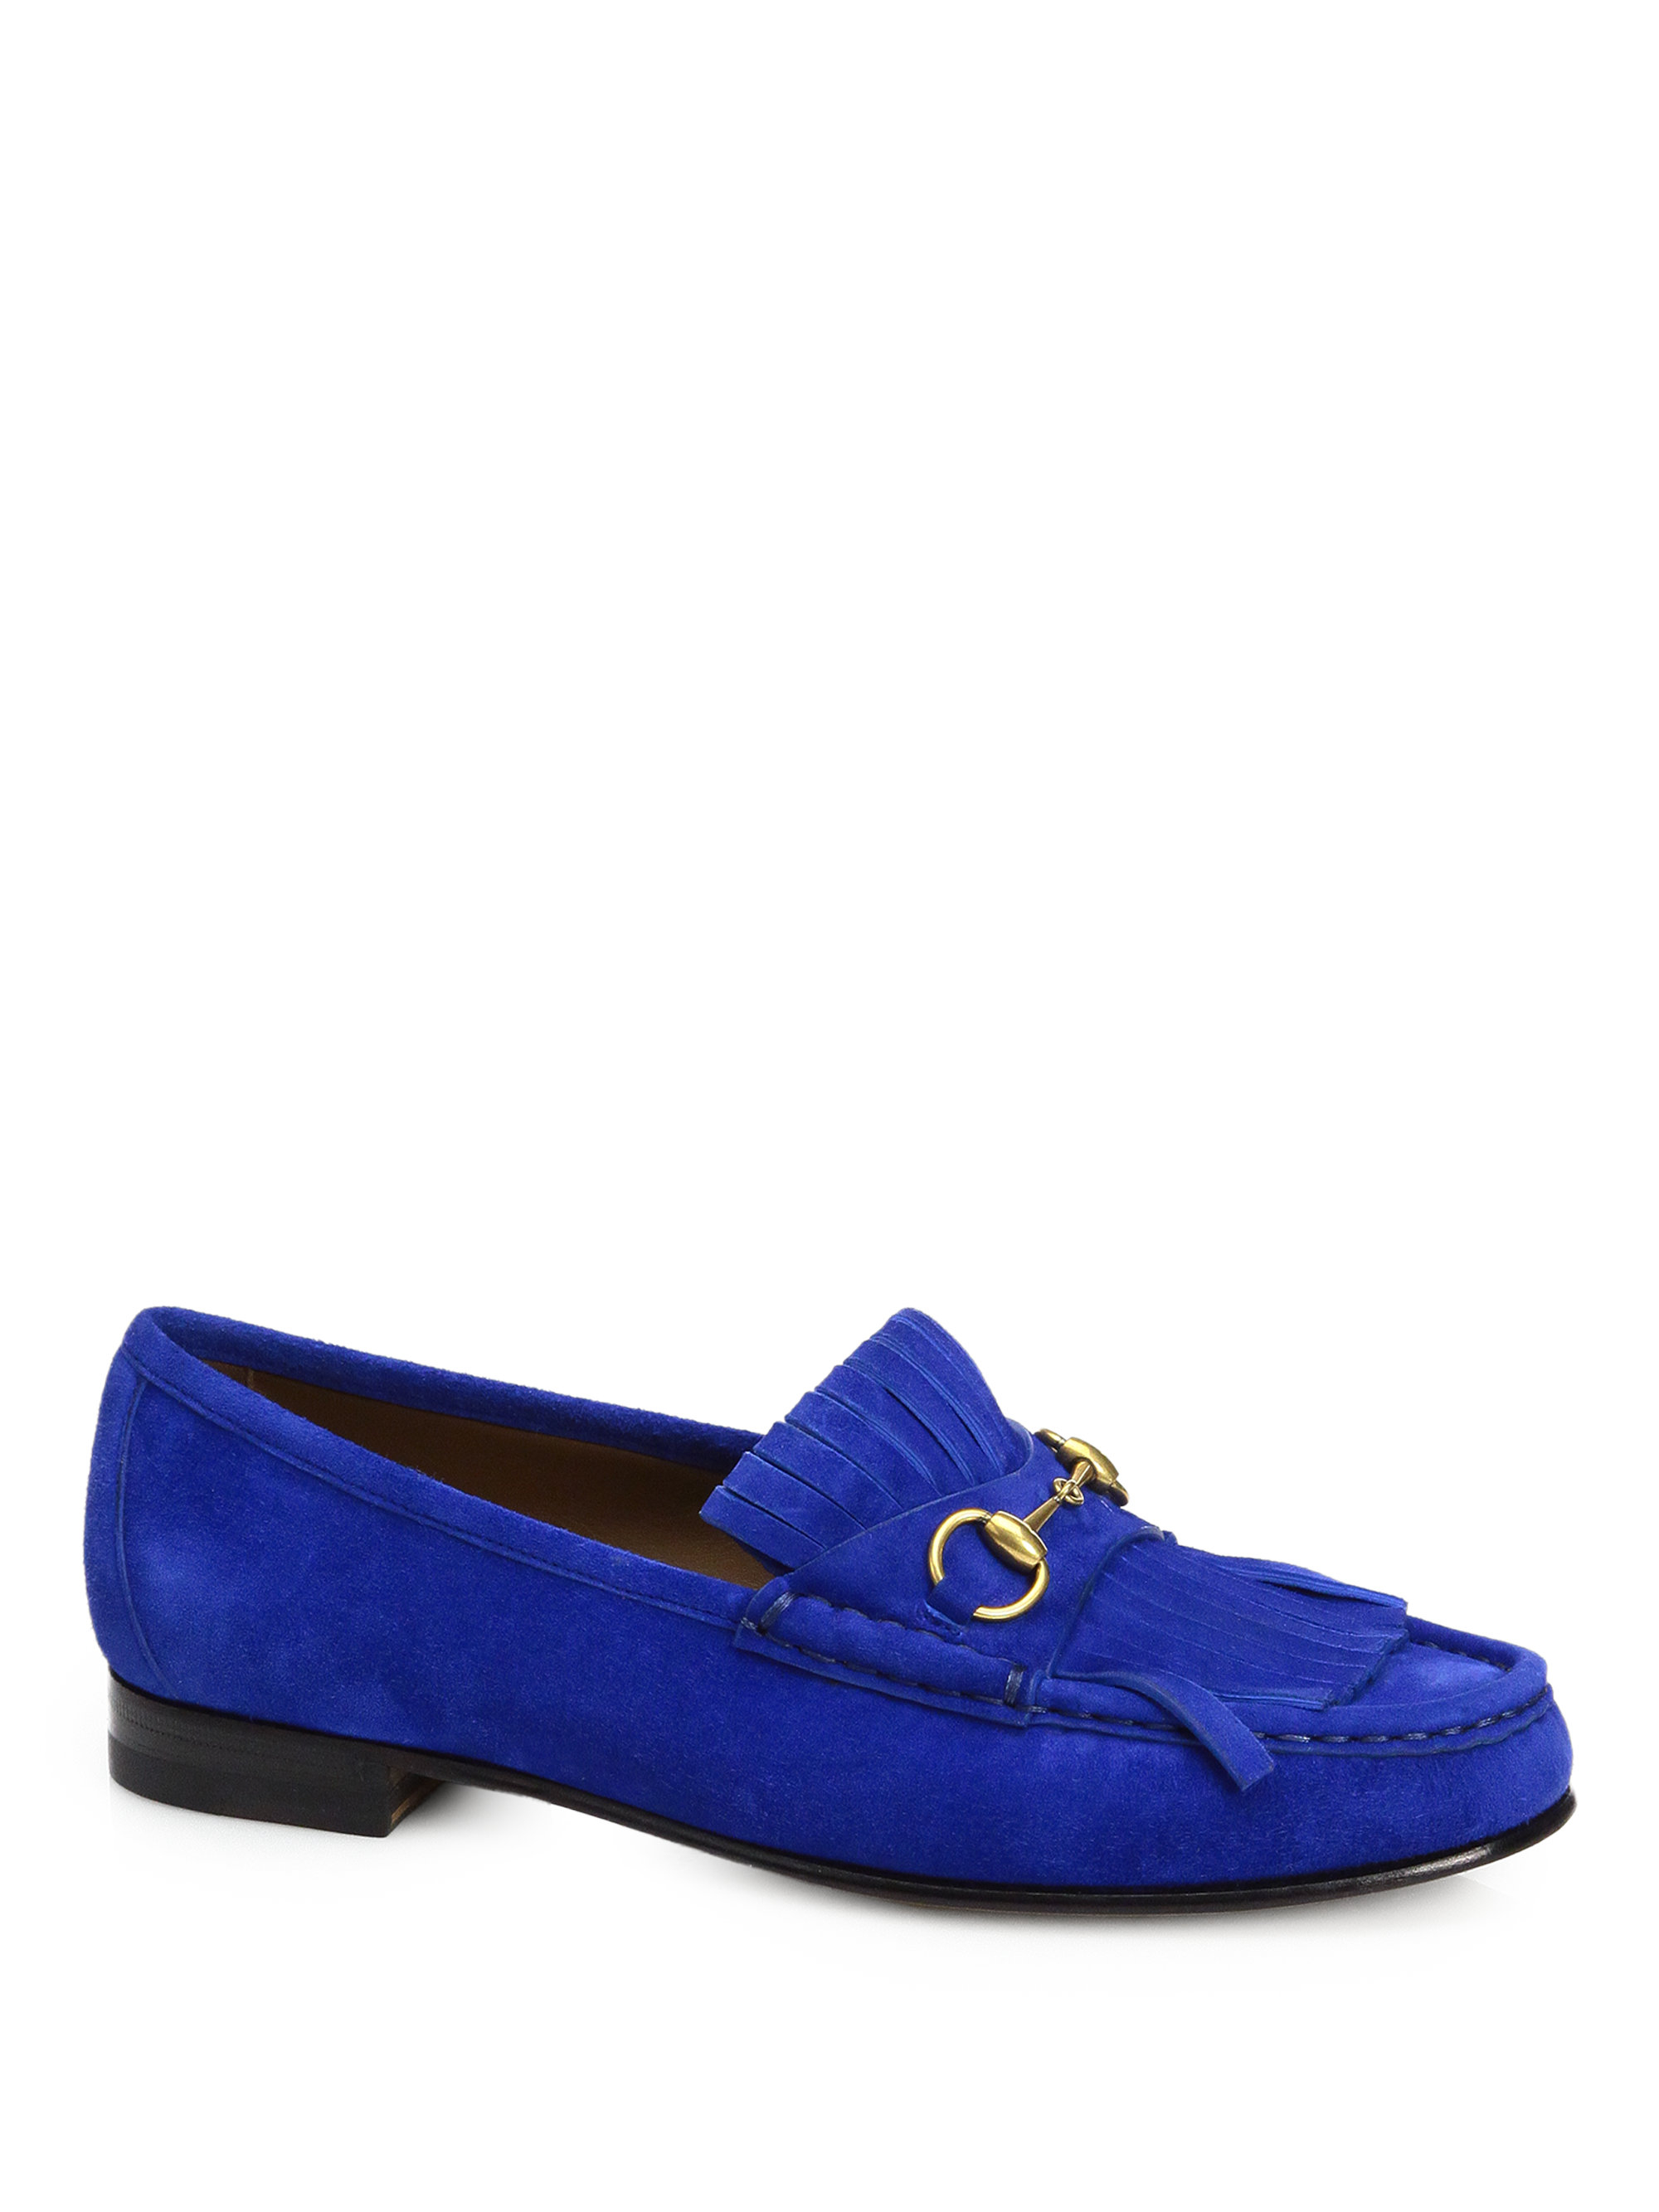 Lyst - Gucci Suede Tassel Front Loafers in Blue